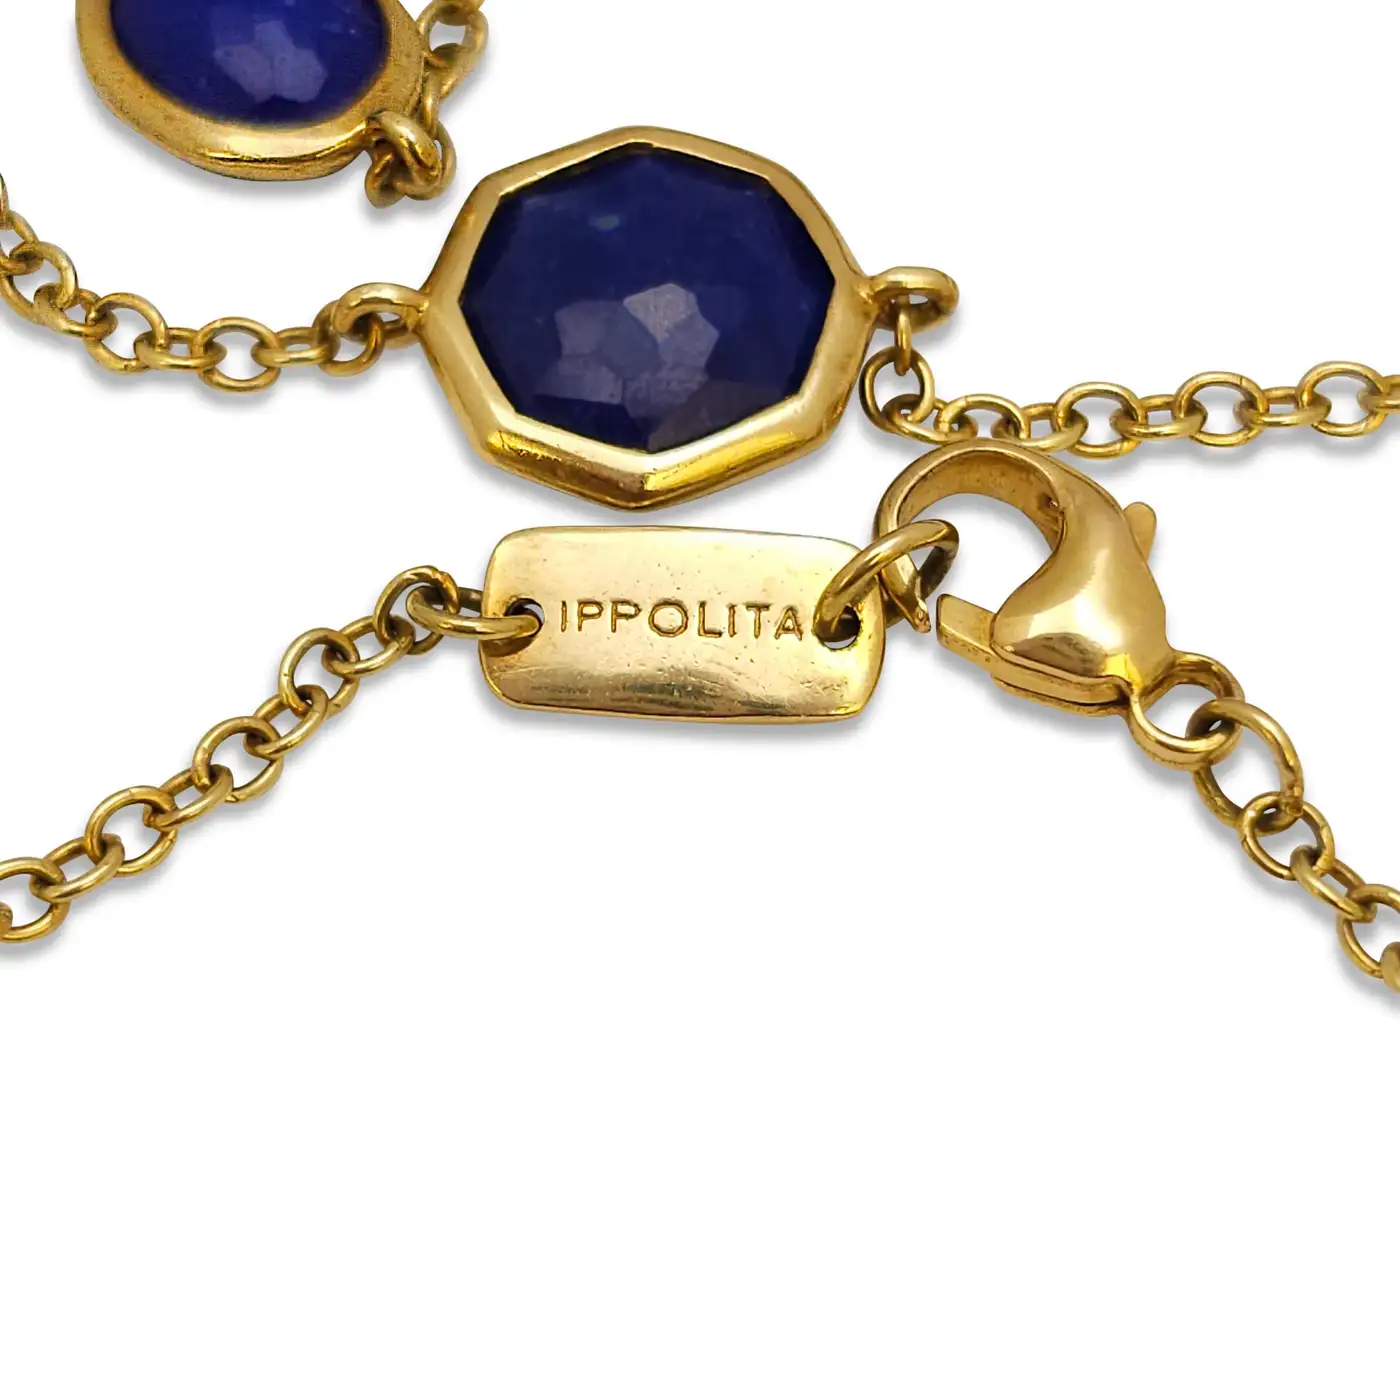 Ippolita-Rock-Sweets-Lolly-Gold-and-Lapis-Necklace-3.webp